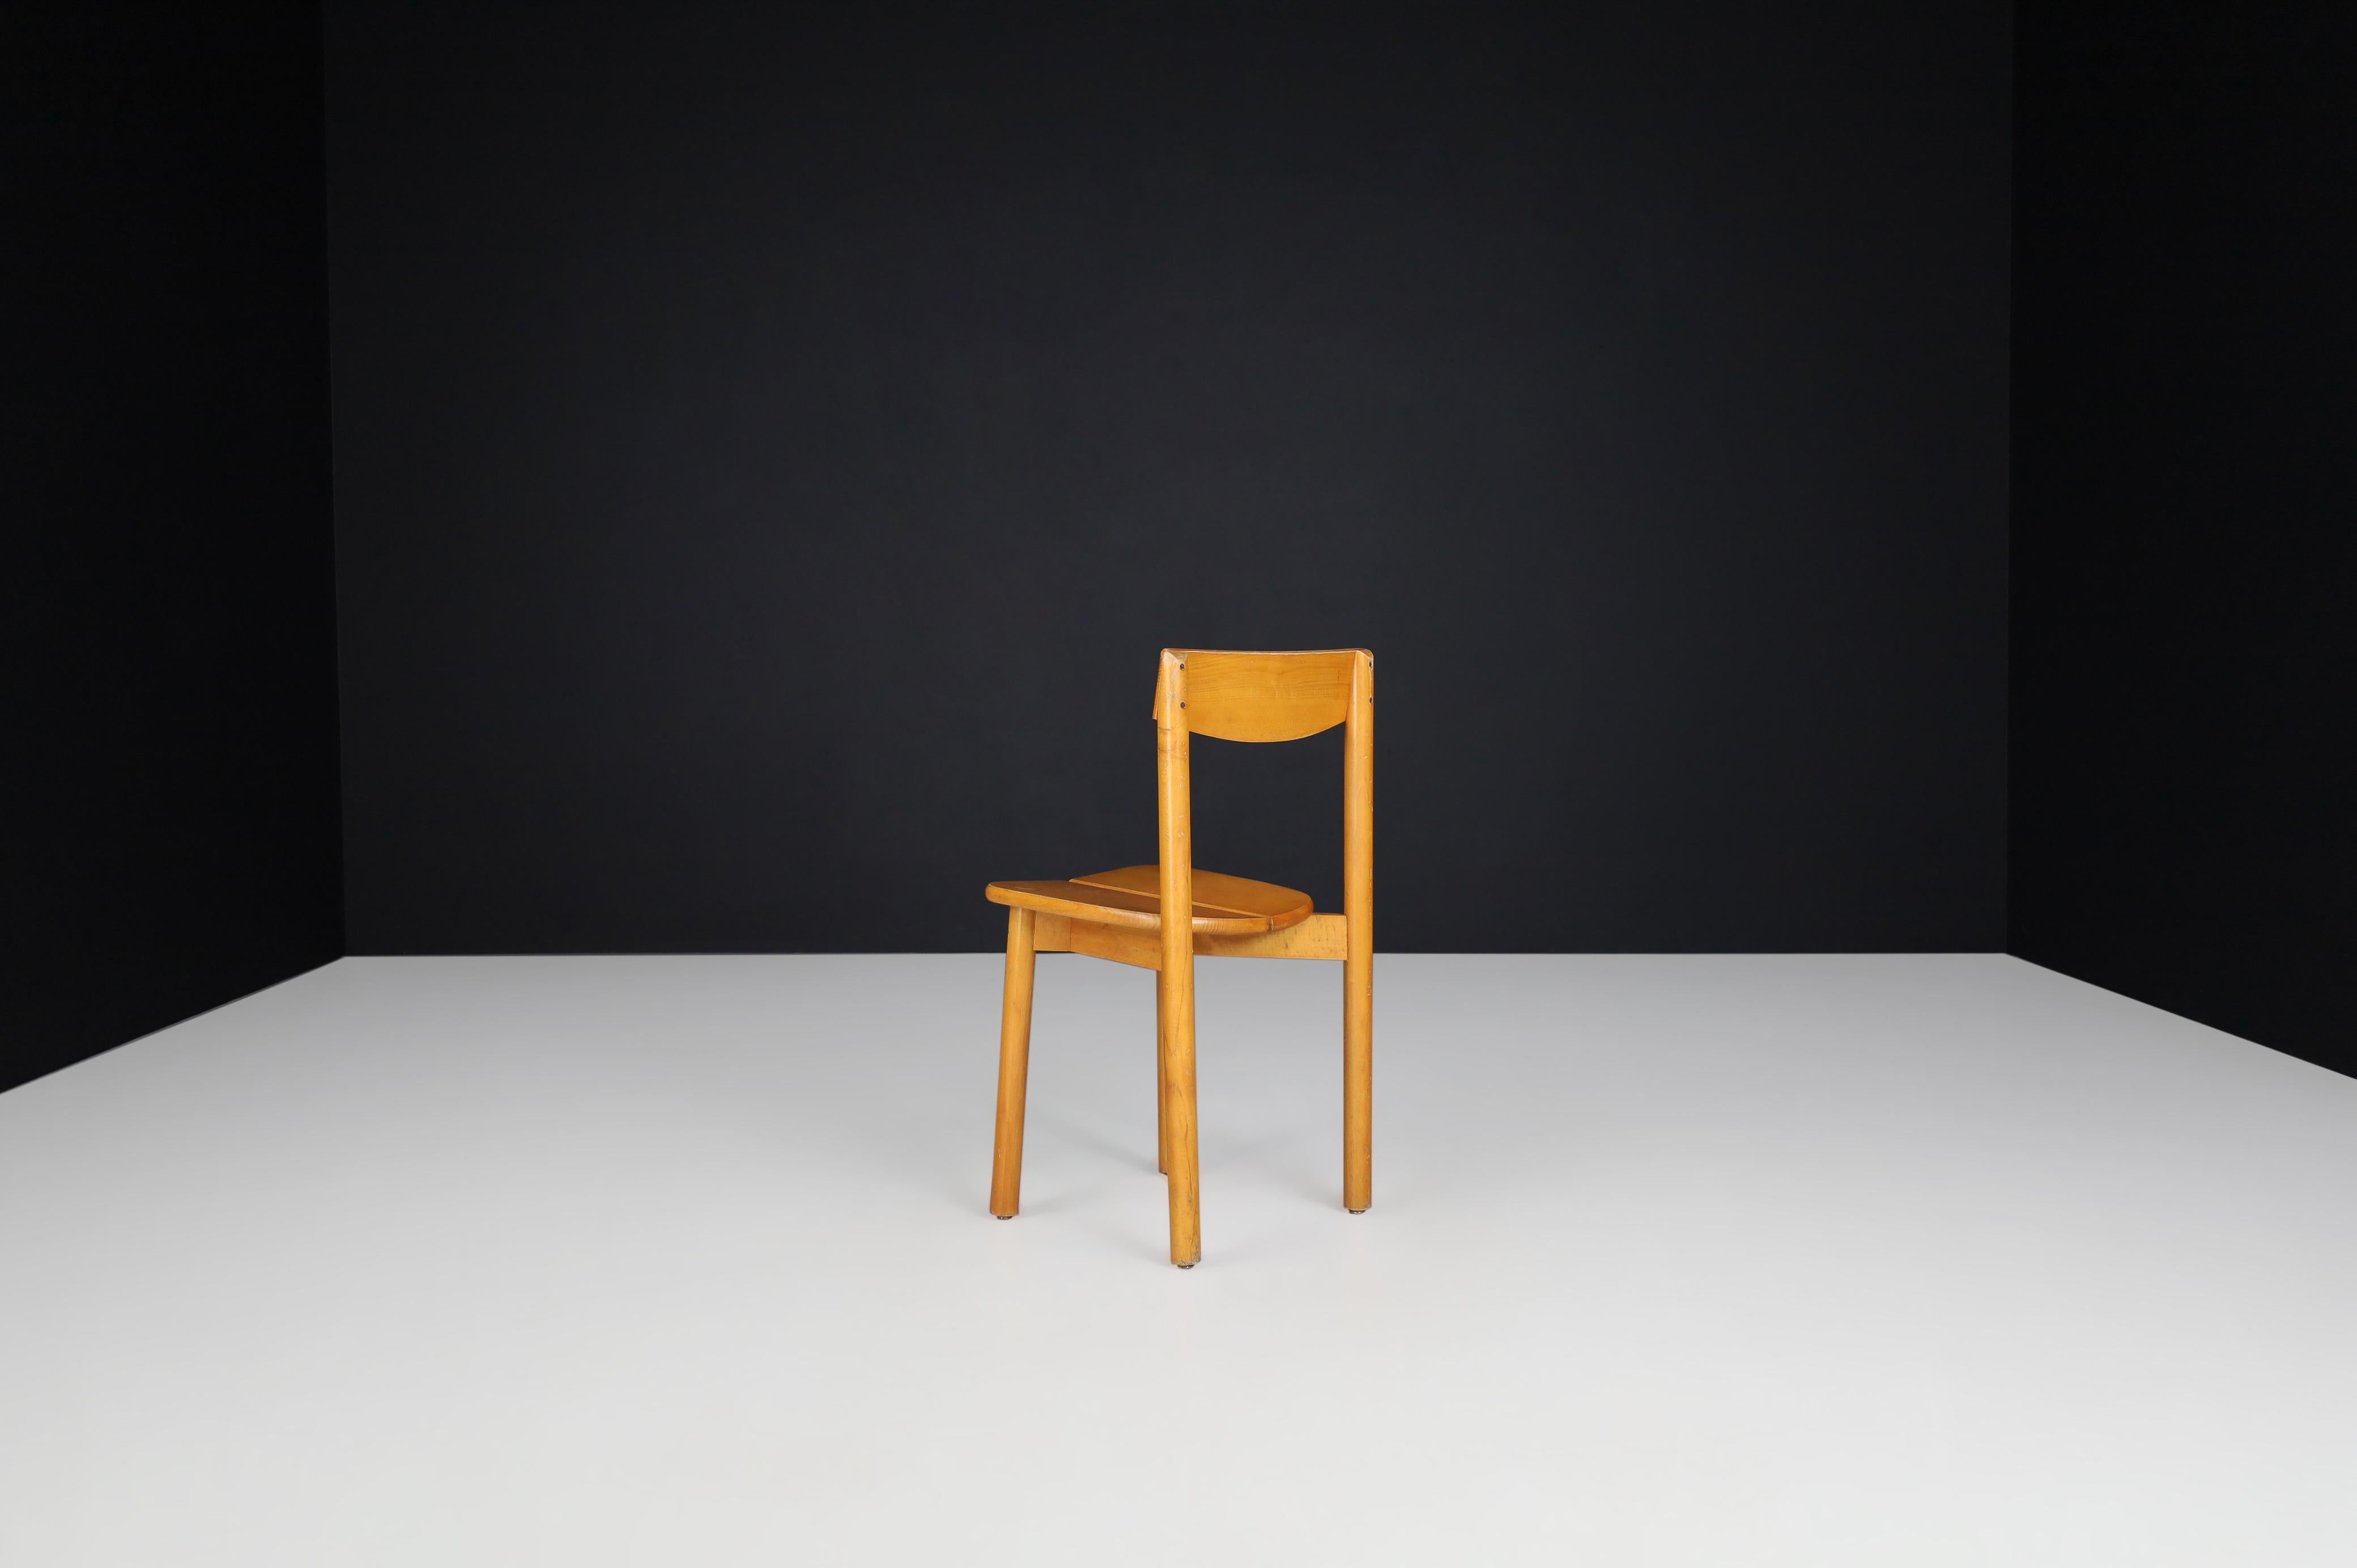 Pierre Gautier Solid Chairs in Blond Beech, France, 1960s For Sale 4